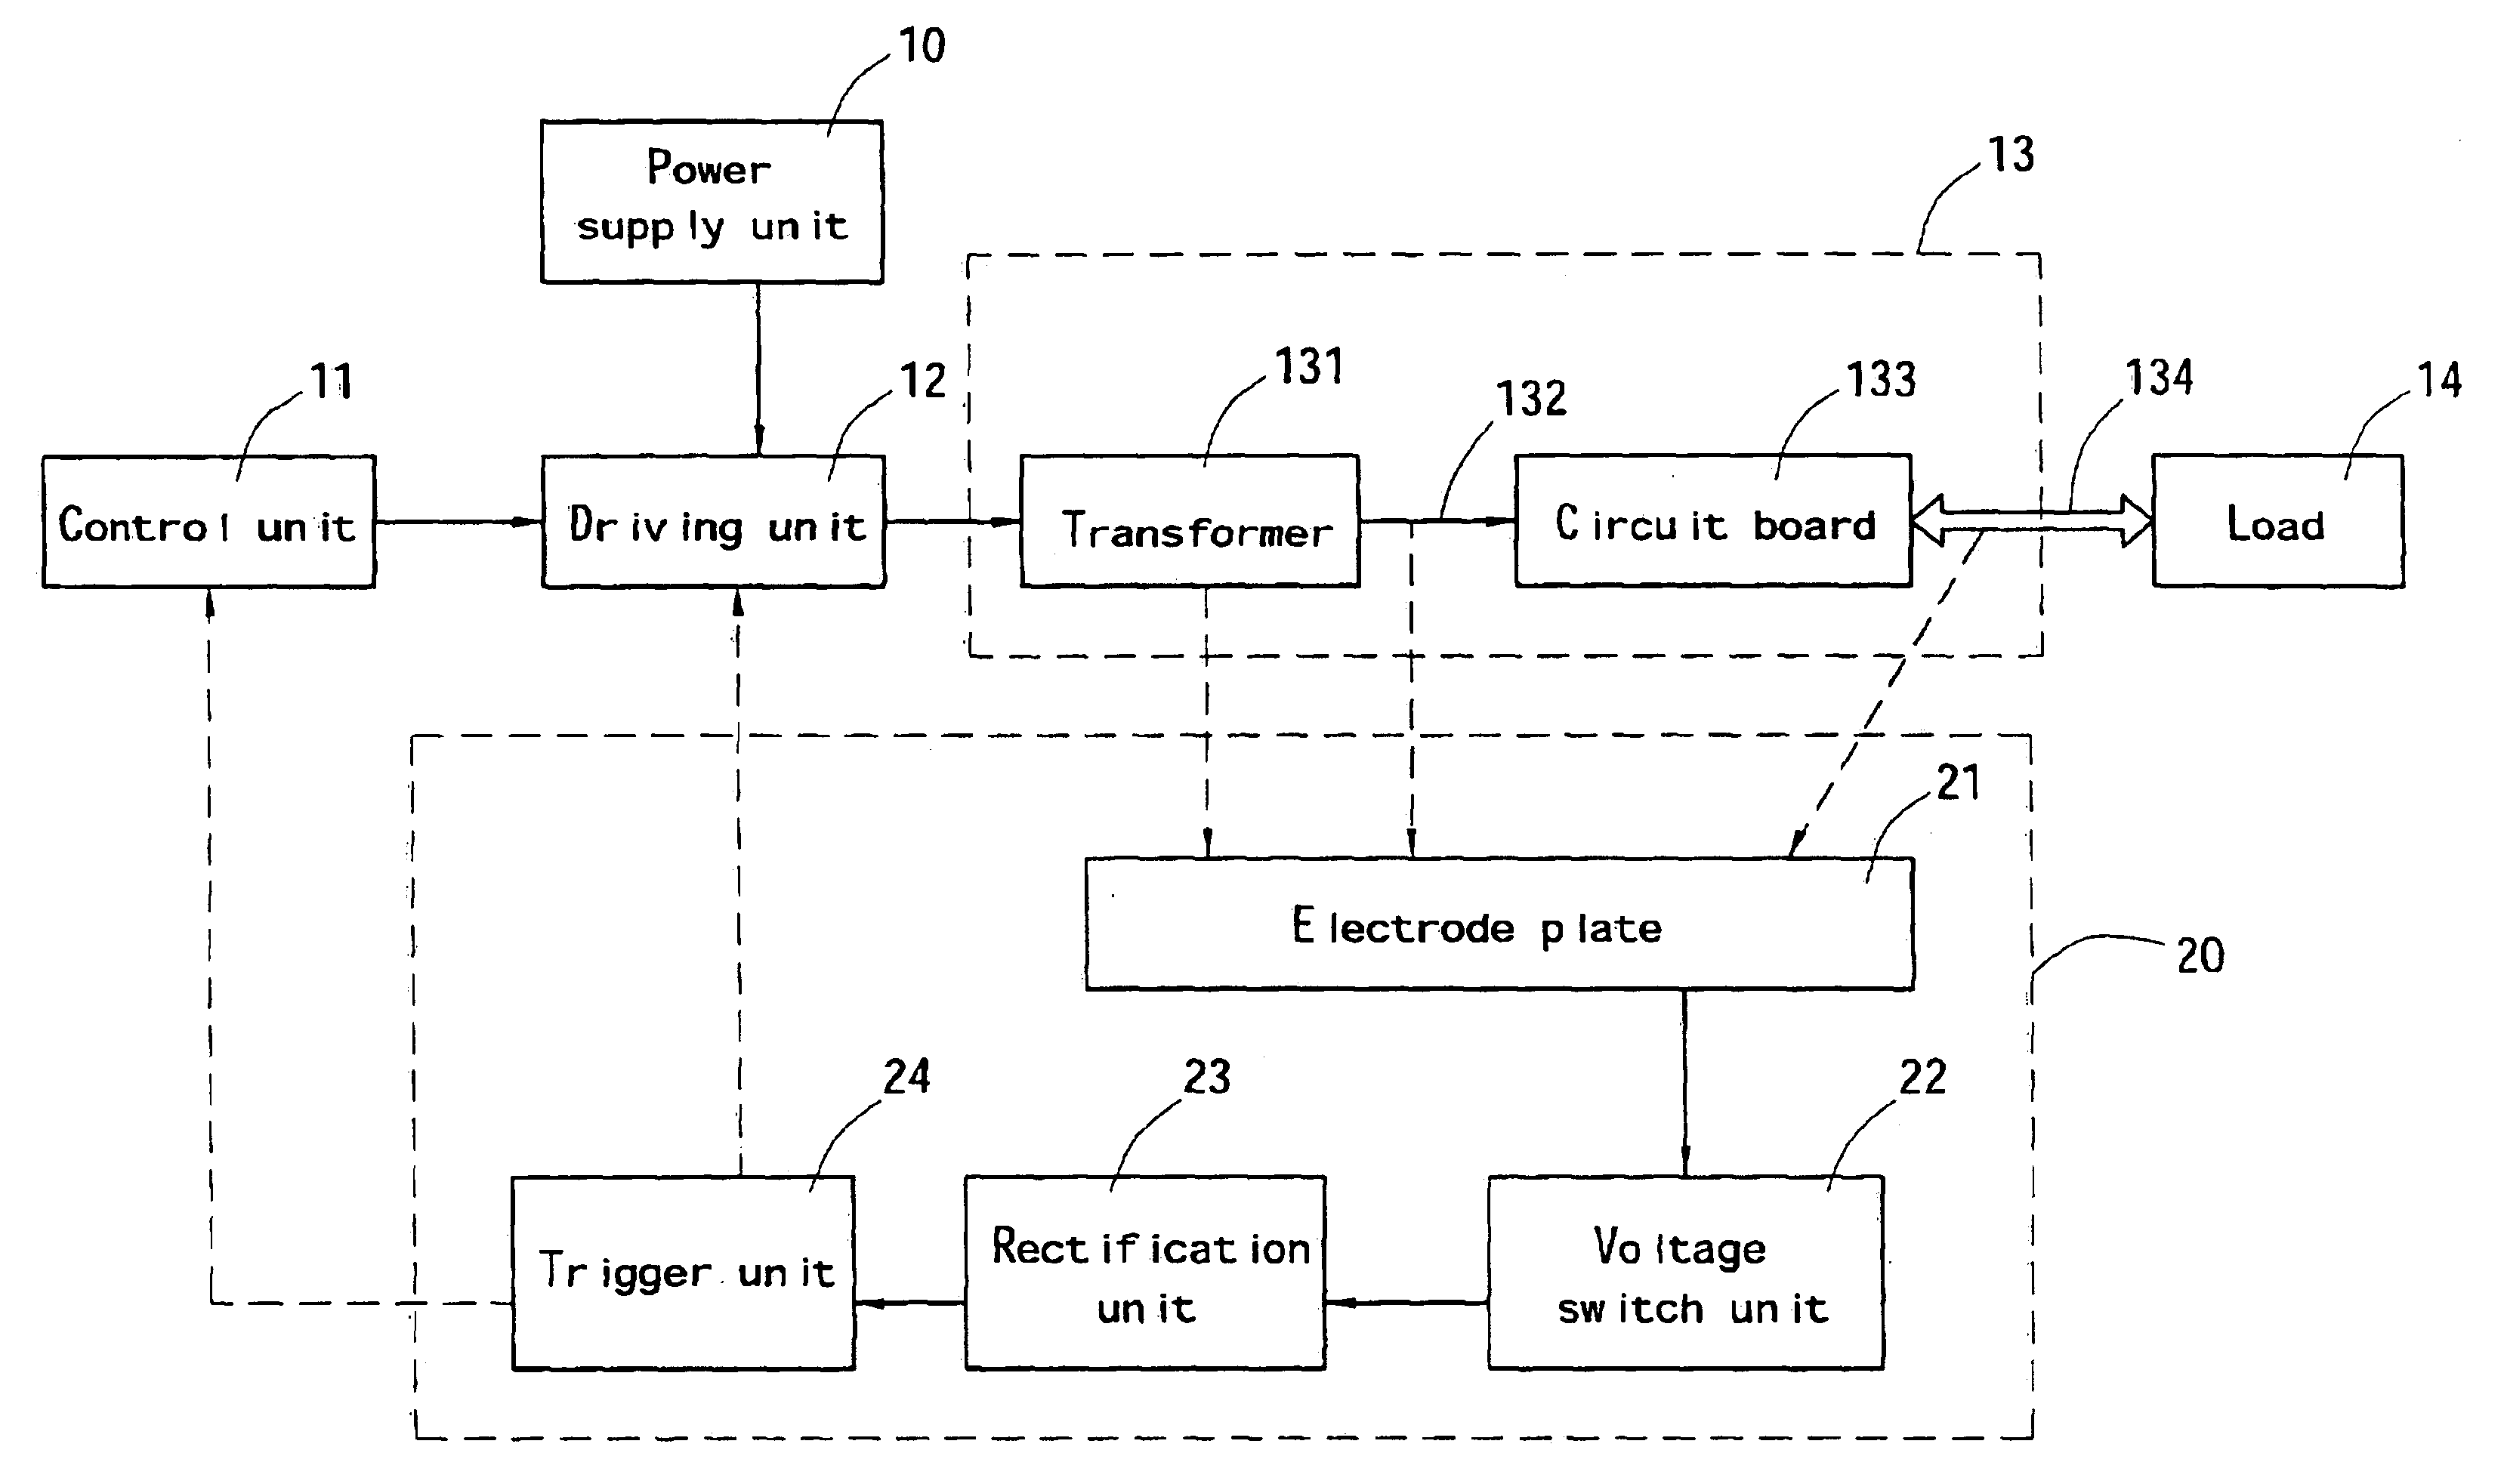 ARC discharge protection apparatus